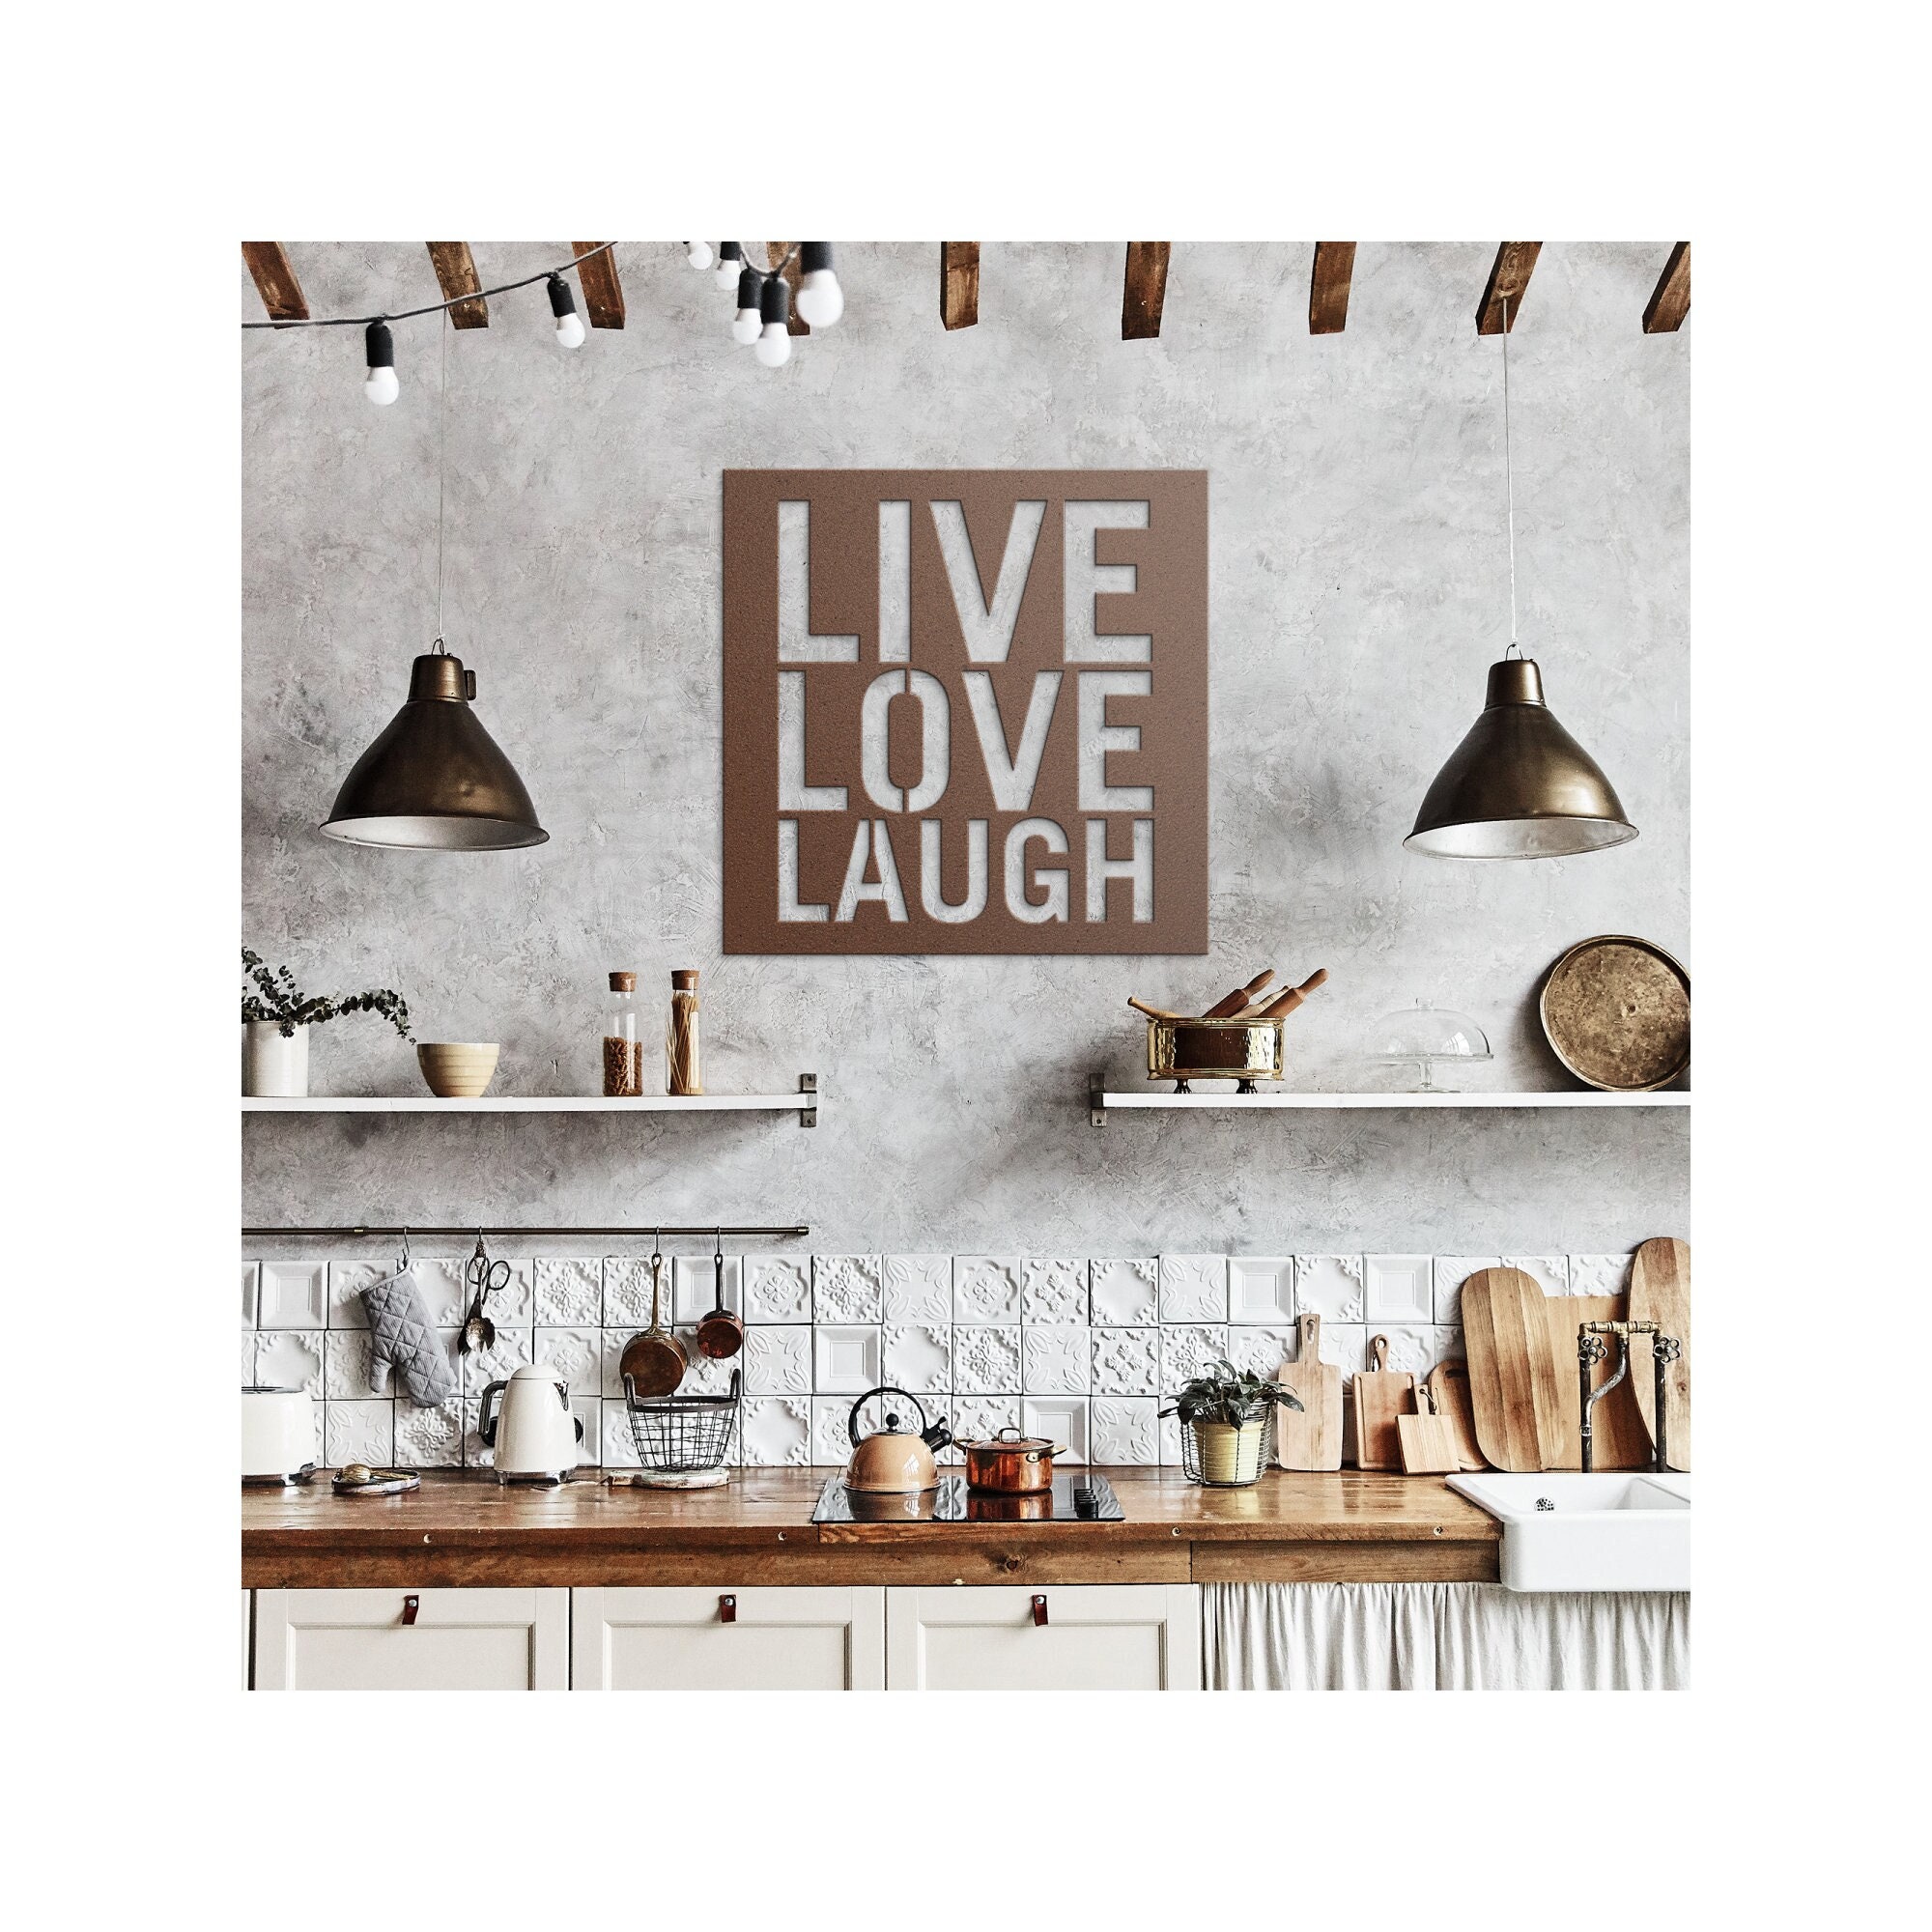 Metal Wall Art, Live Love Laugh, Home Office Decoration, Metal